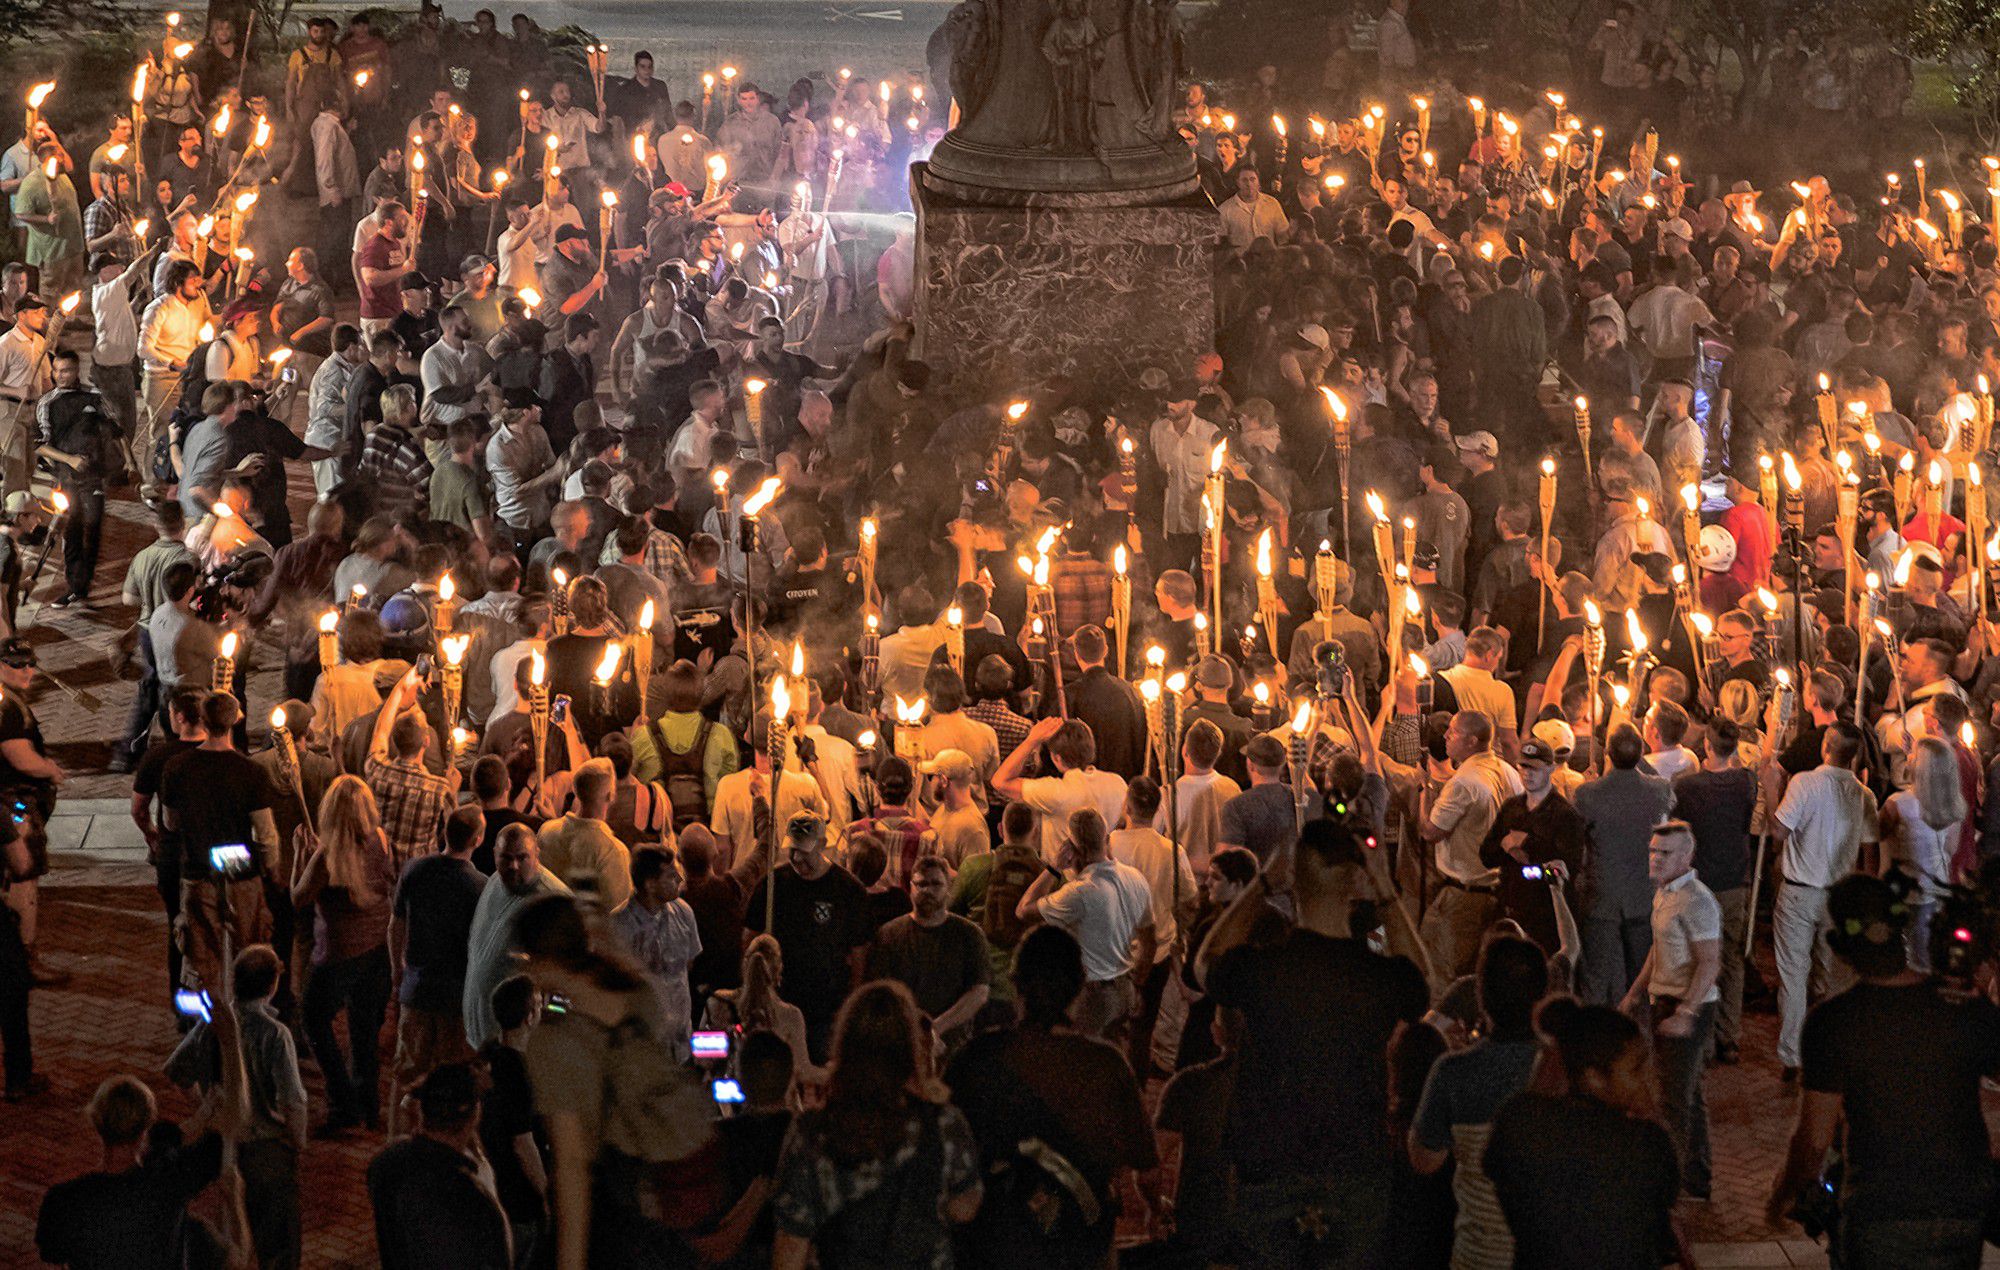 Chanting “white lives matter!” and “Jews will not replace us!” hundreds of neo-Nazis and white supremacists carried torches across the University of Virginia campus Aug. 11. MUST CREDIT: Evelyn Hockstein, The Washington Post.